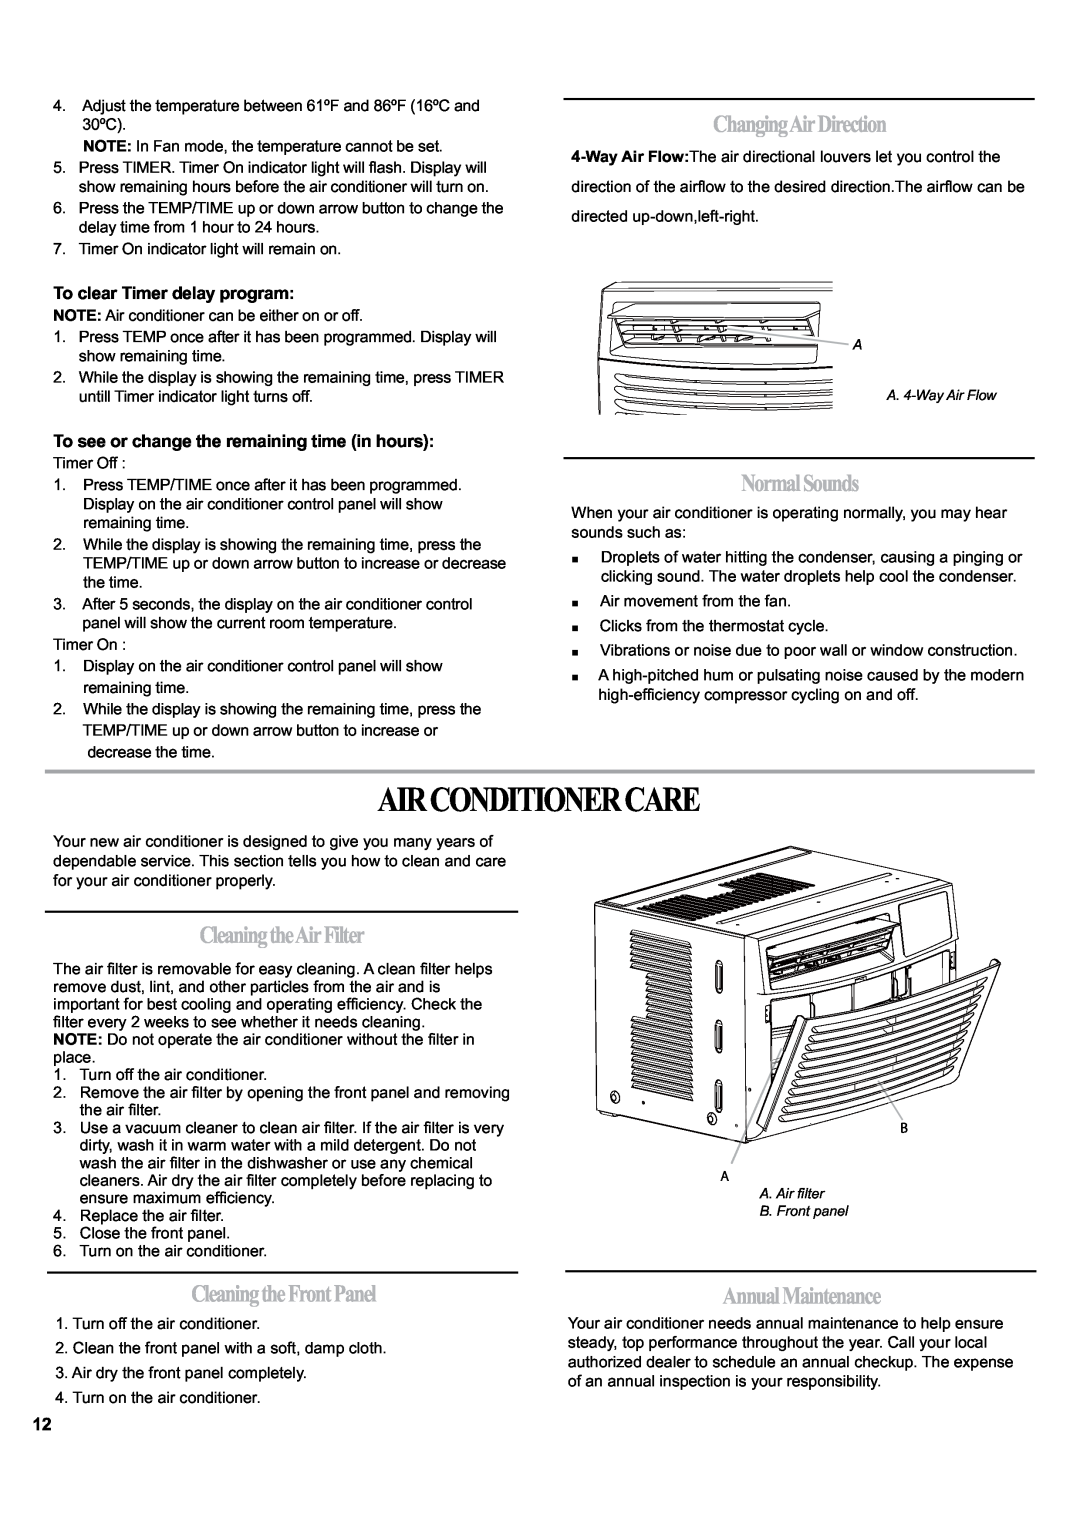 Haier ESA405K manual Airconditionercare, ChangingAirDirection, NormalSounds, CleaningtheAirFilter, CleaningtheFrontPanel 